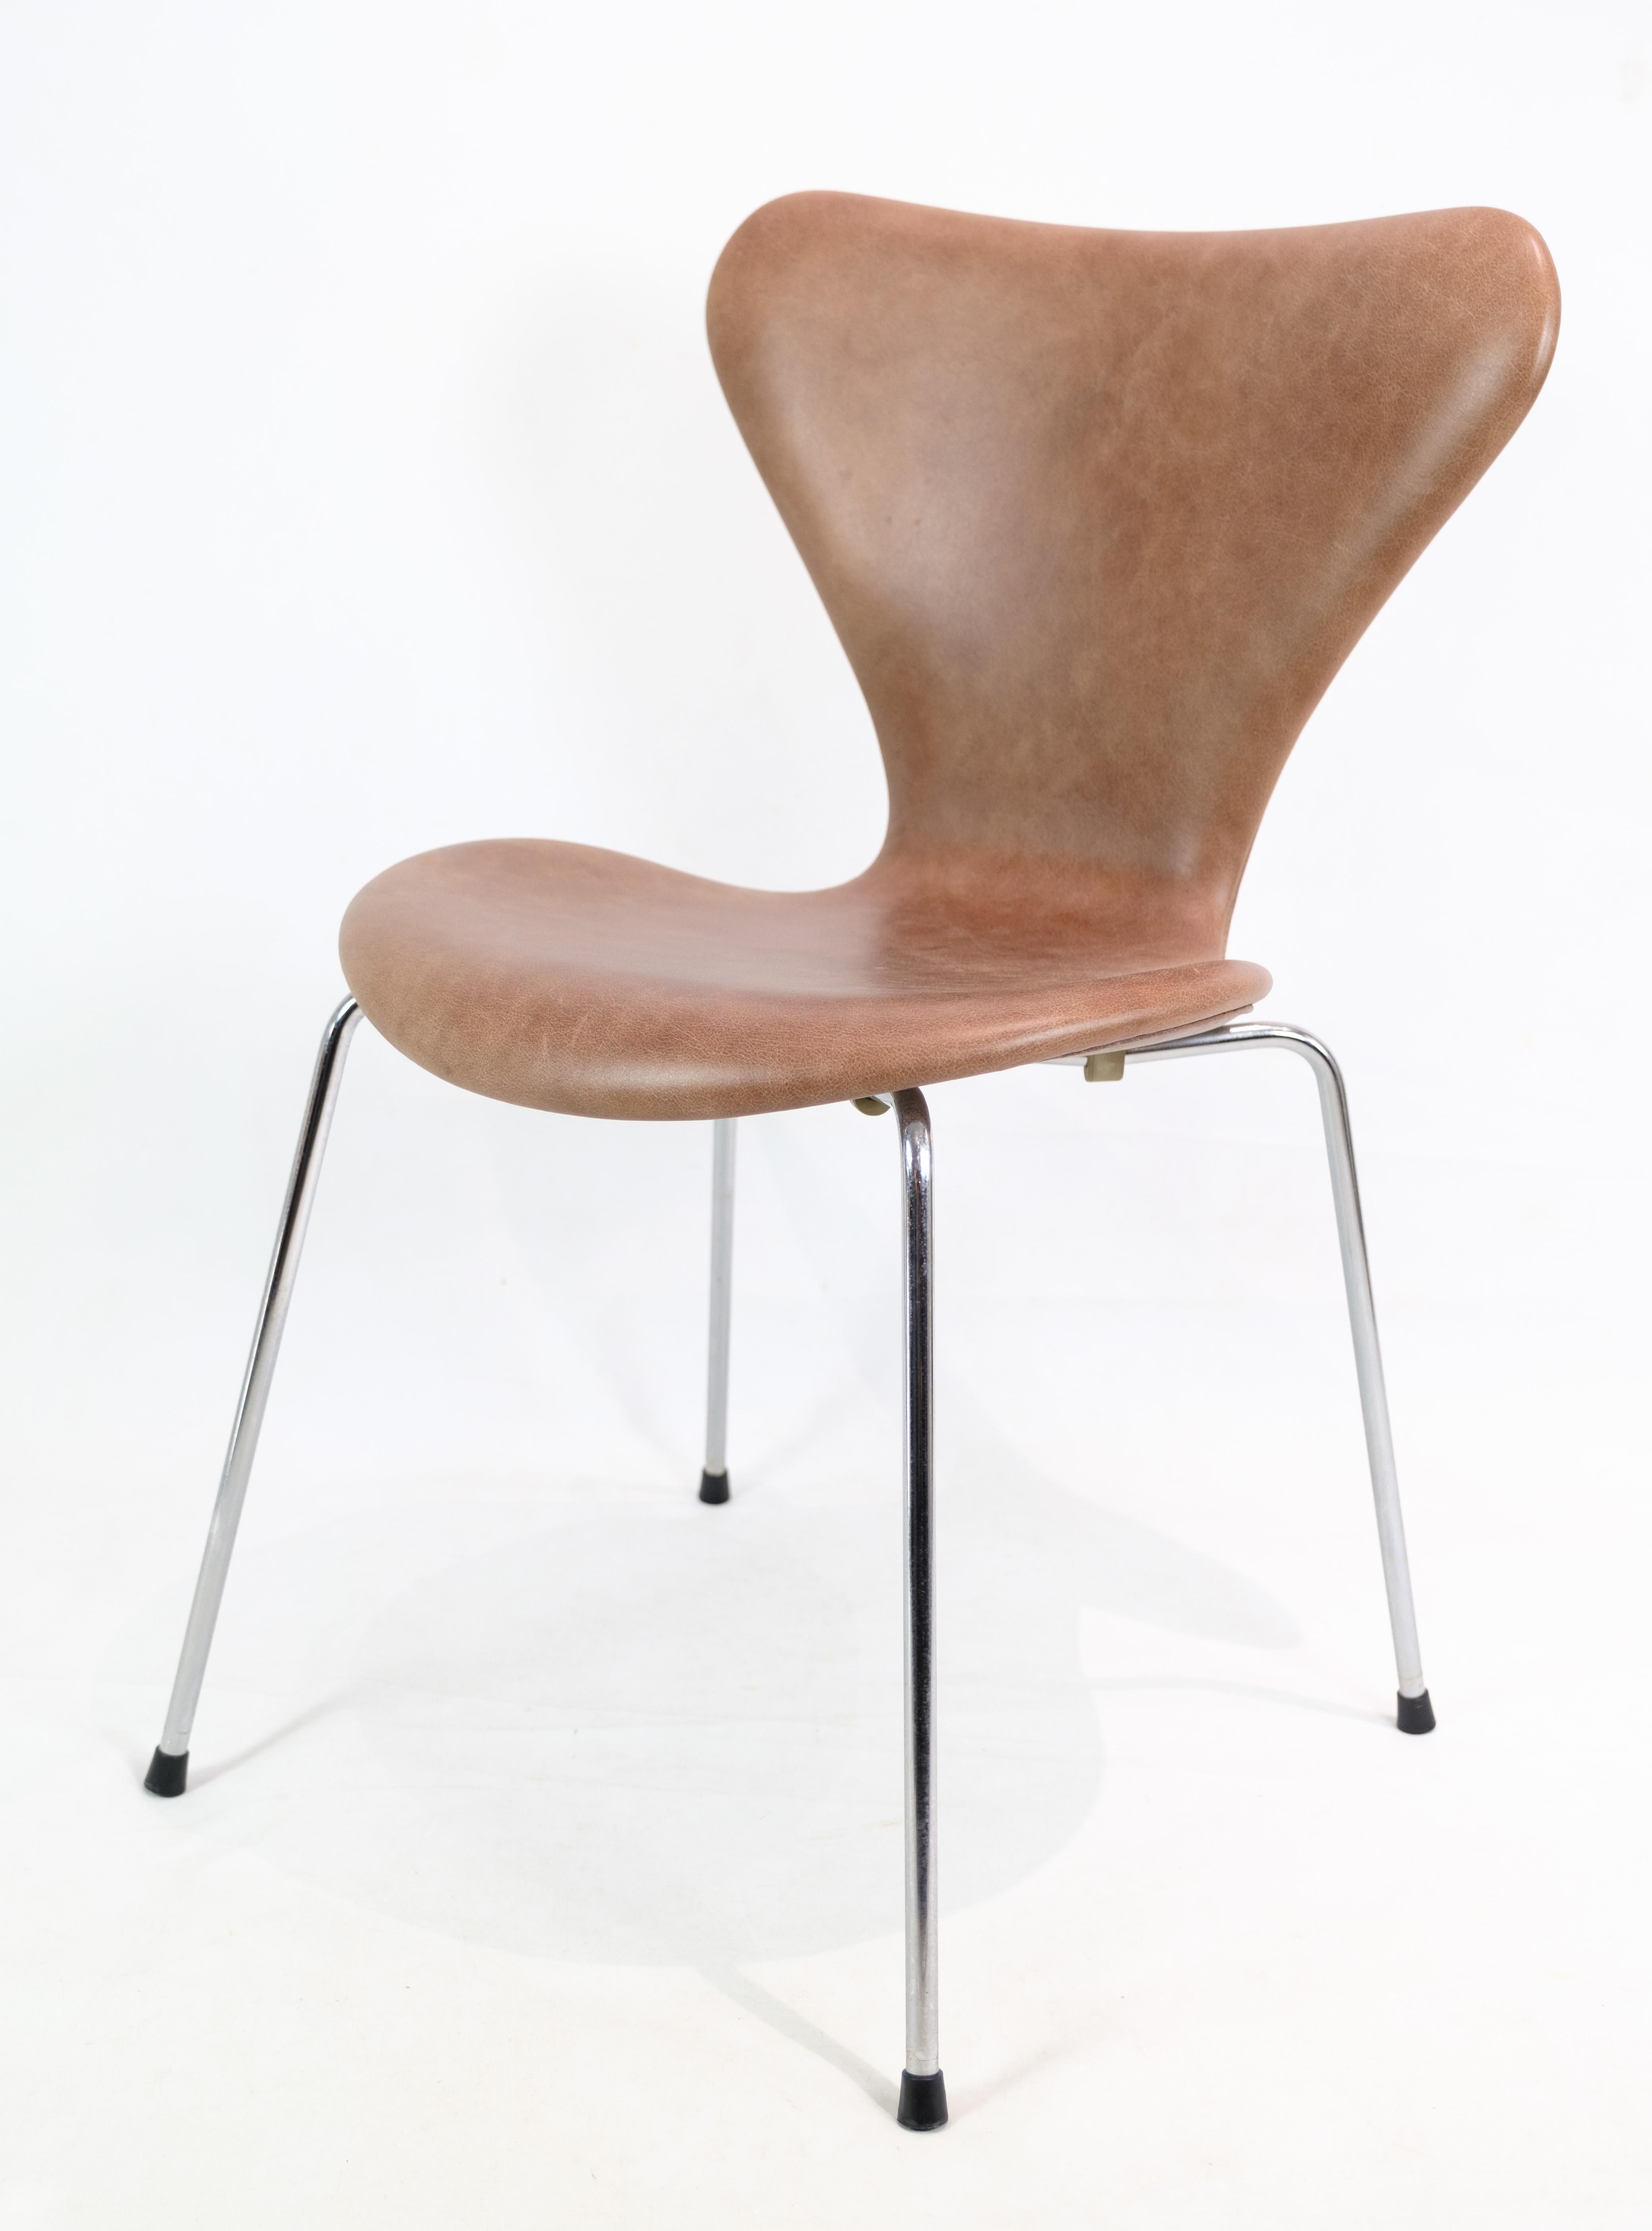 A set of 6 Seven chairs, model 3107, designed by Arne Jacobsen and manufactured by Fritz Hansen. The chairs are upholstered in light brown elegance leather and in very nice used condition with original patina.

This product will be inspected